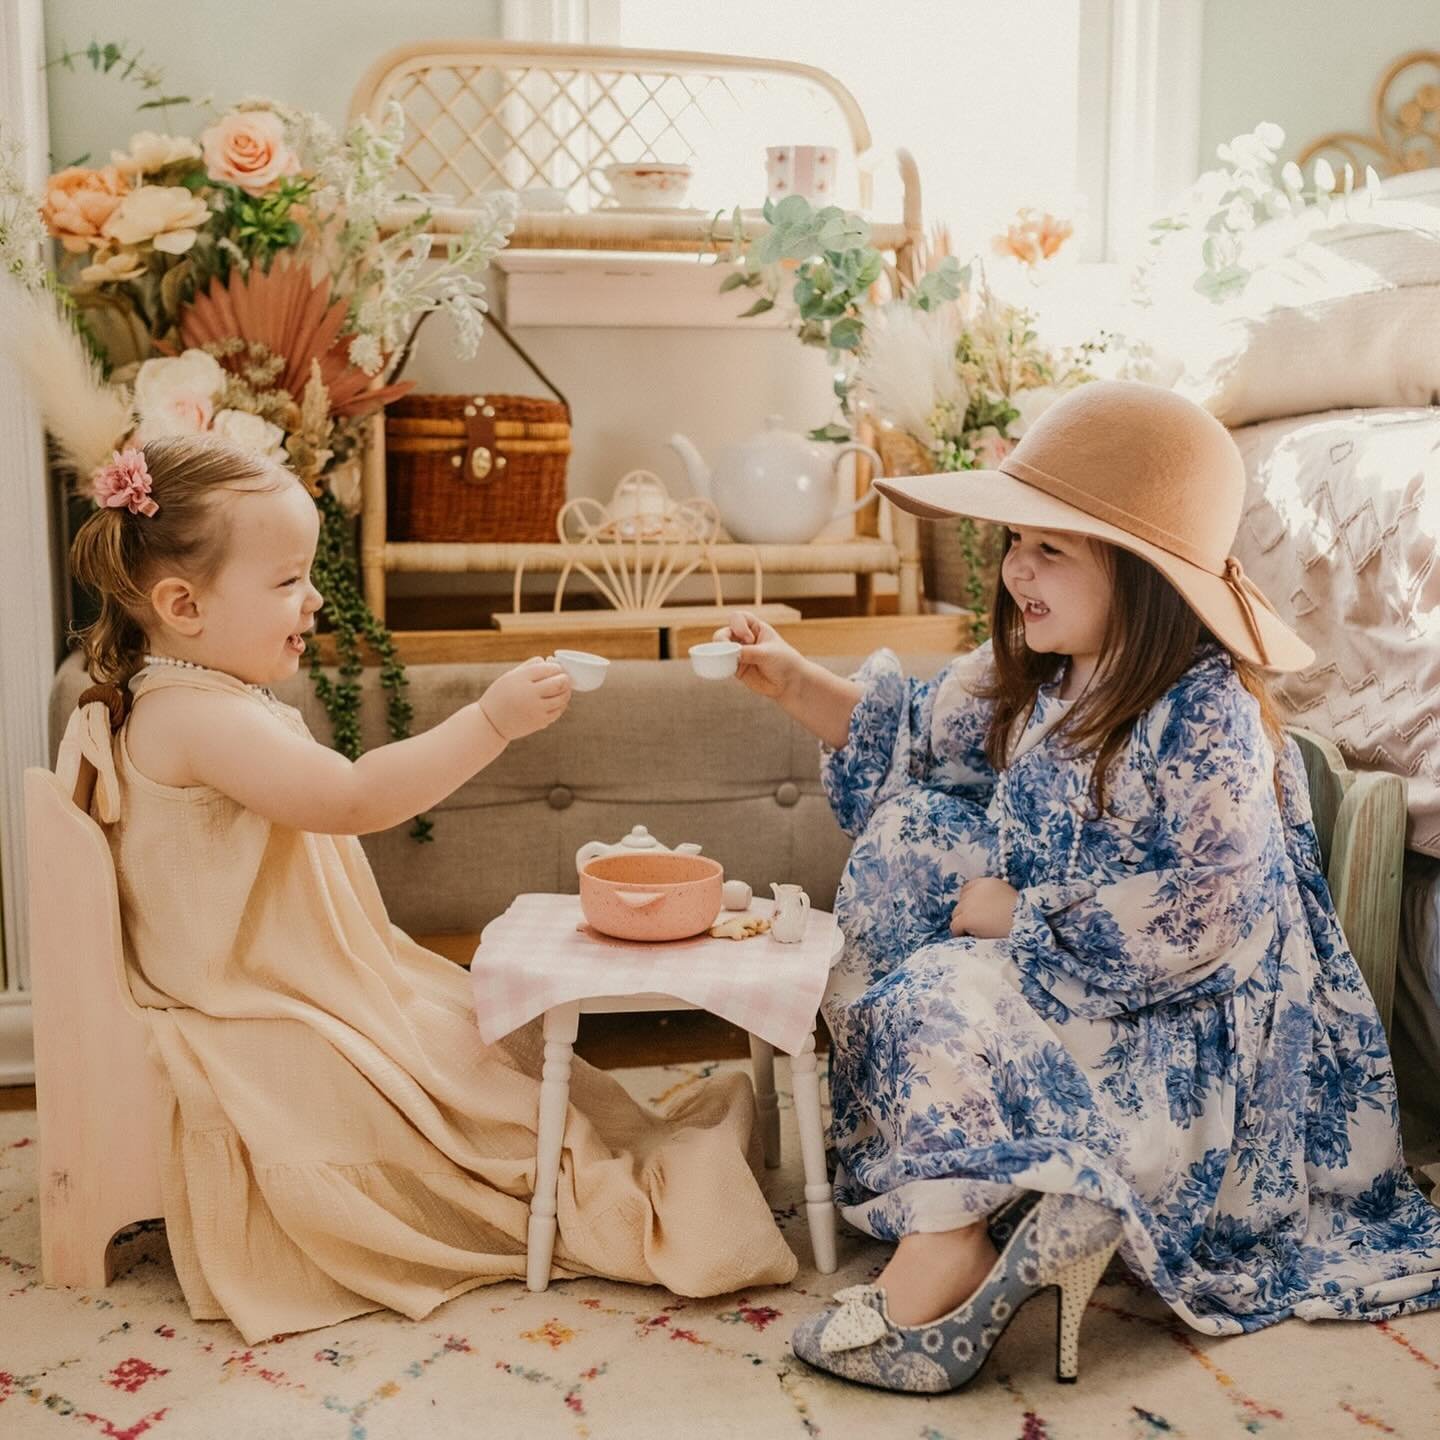 Happy Mother&rsquo;s Day! 
.
.
I wanted to do something cute for our Mother&rsquo;s Day shoot. So my girls got to wear my clothes. Ara picked out her favorite pair of my heels and we built an outfit around it. Rowie is wearing my dress and a necklace